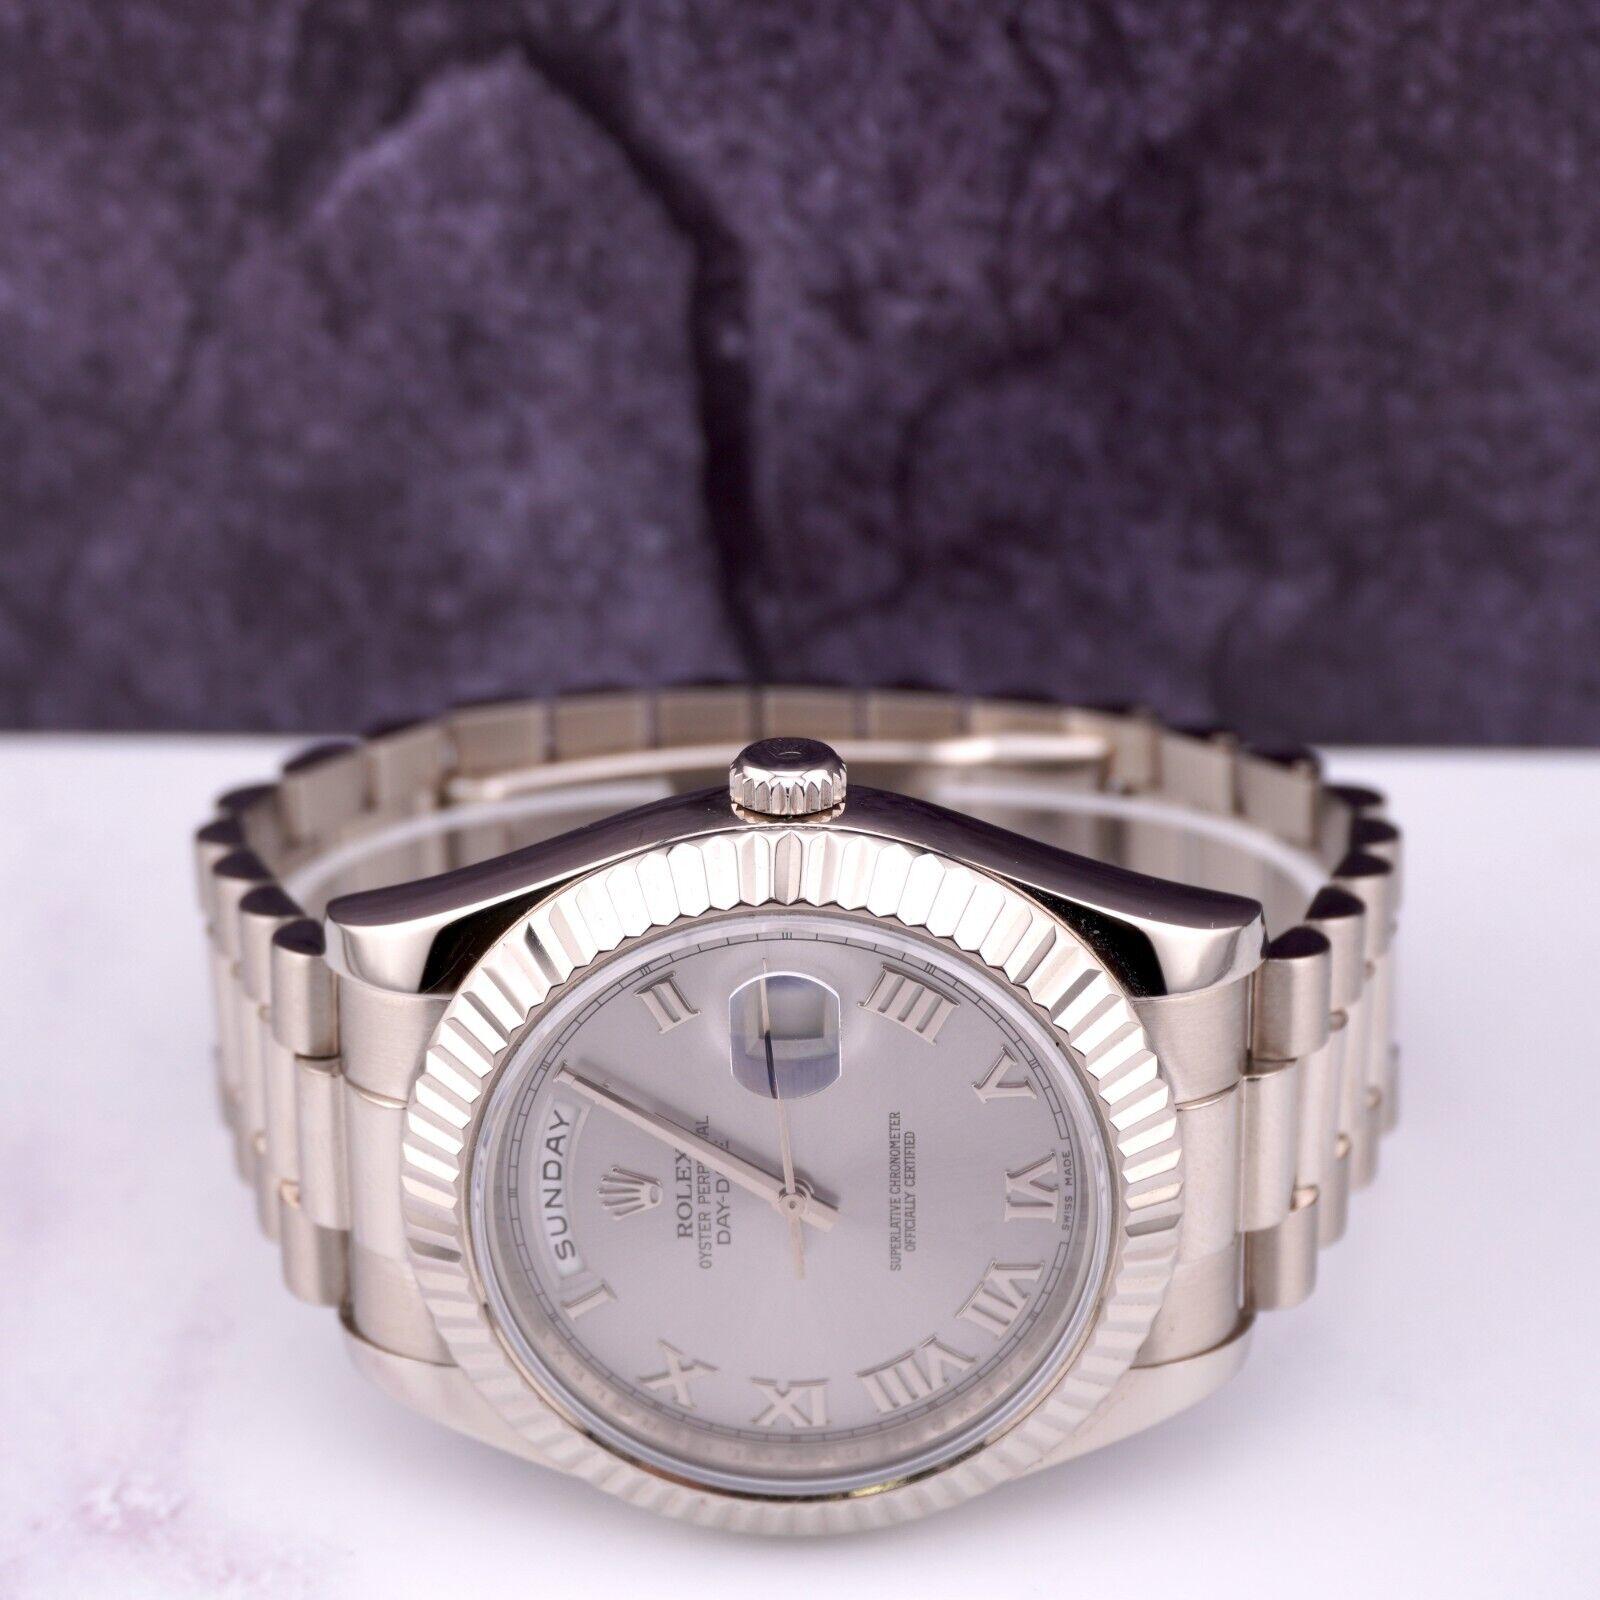 Rolex Day-Date 40 President 18k White Gold Men's Watch Silver DIAL Ref: 218239 For Sale 3